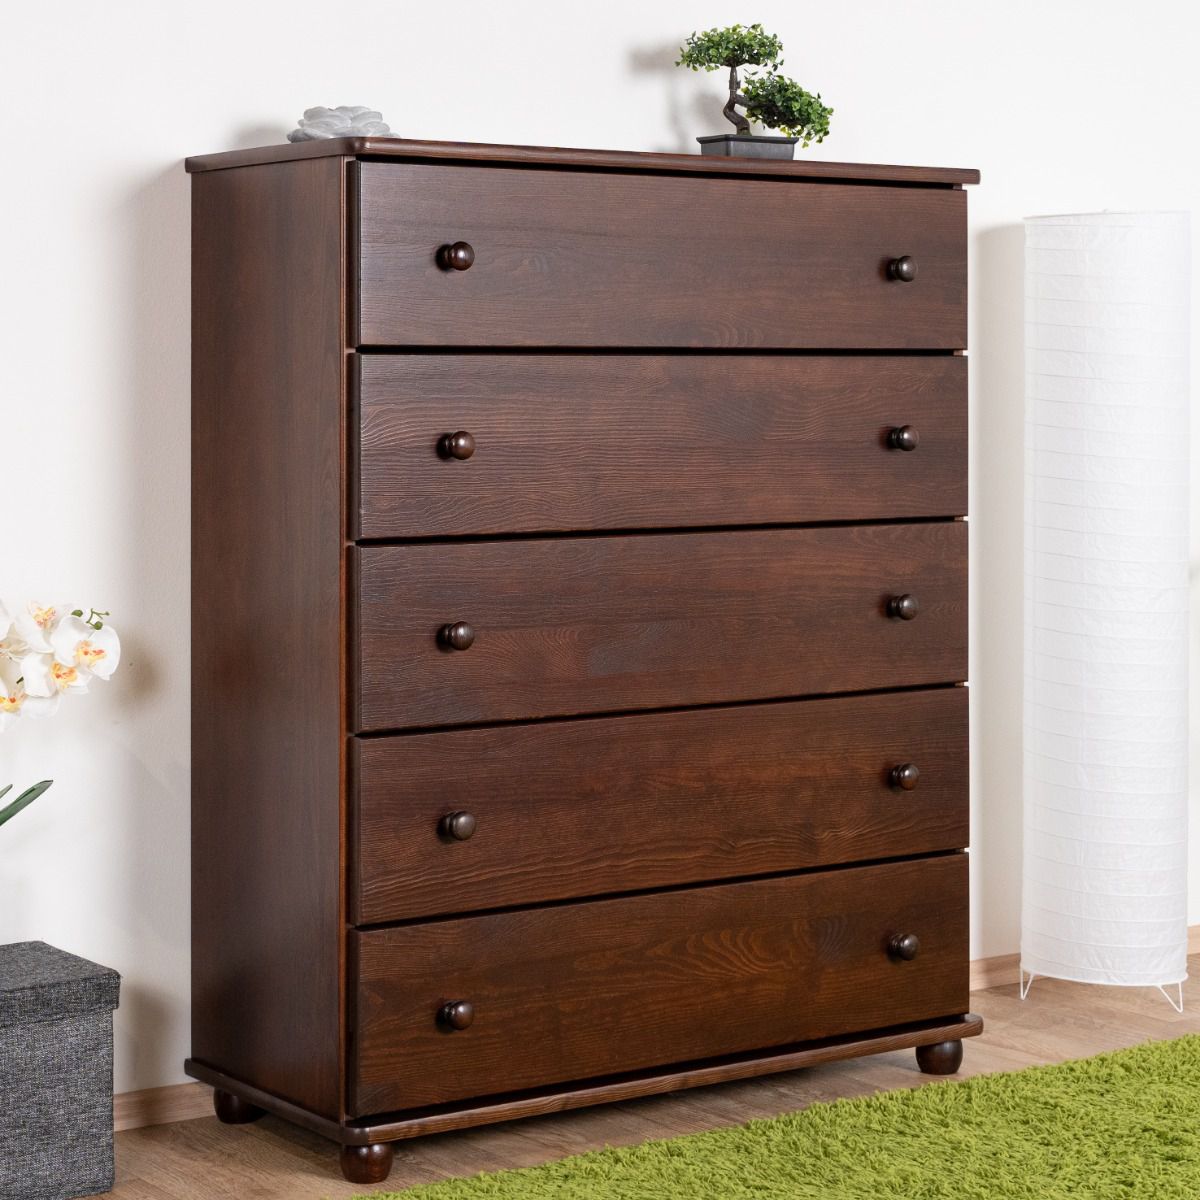 Chest of drawers solid pine solid wood walnut color 139 - Dimensions: 123 x 100 x 42 cm (H x W x D)